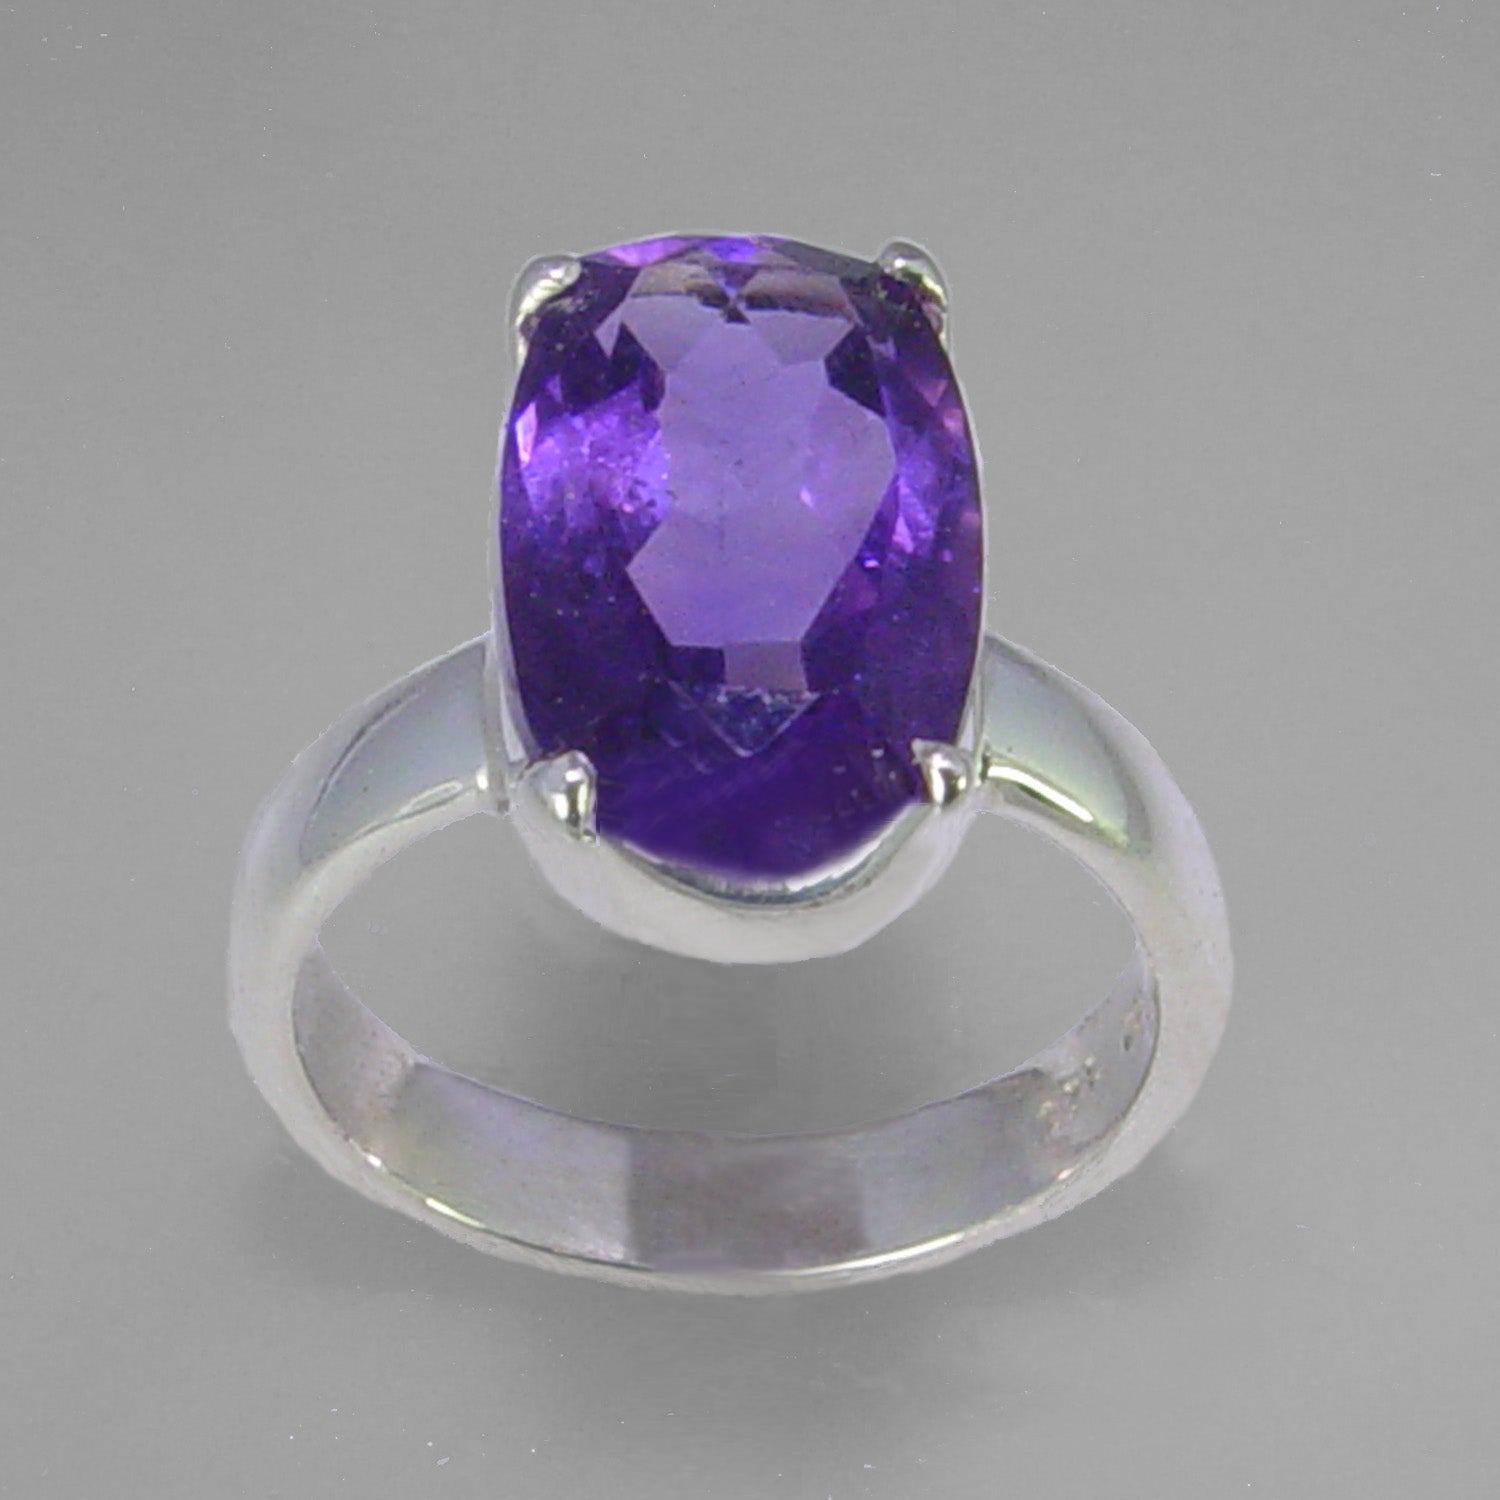 Amethyst 5.8 ct Antique Emerald Cut Sterling Silver Ring, Size 7.5